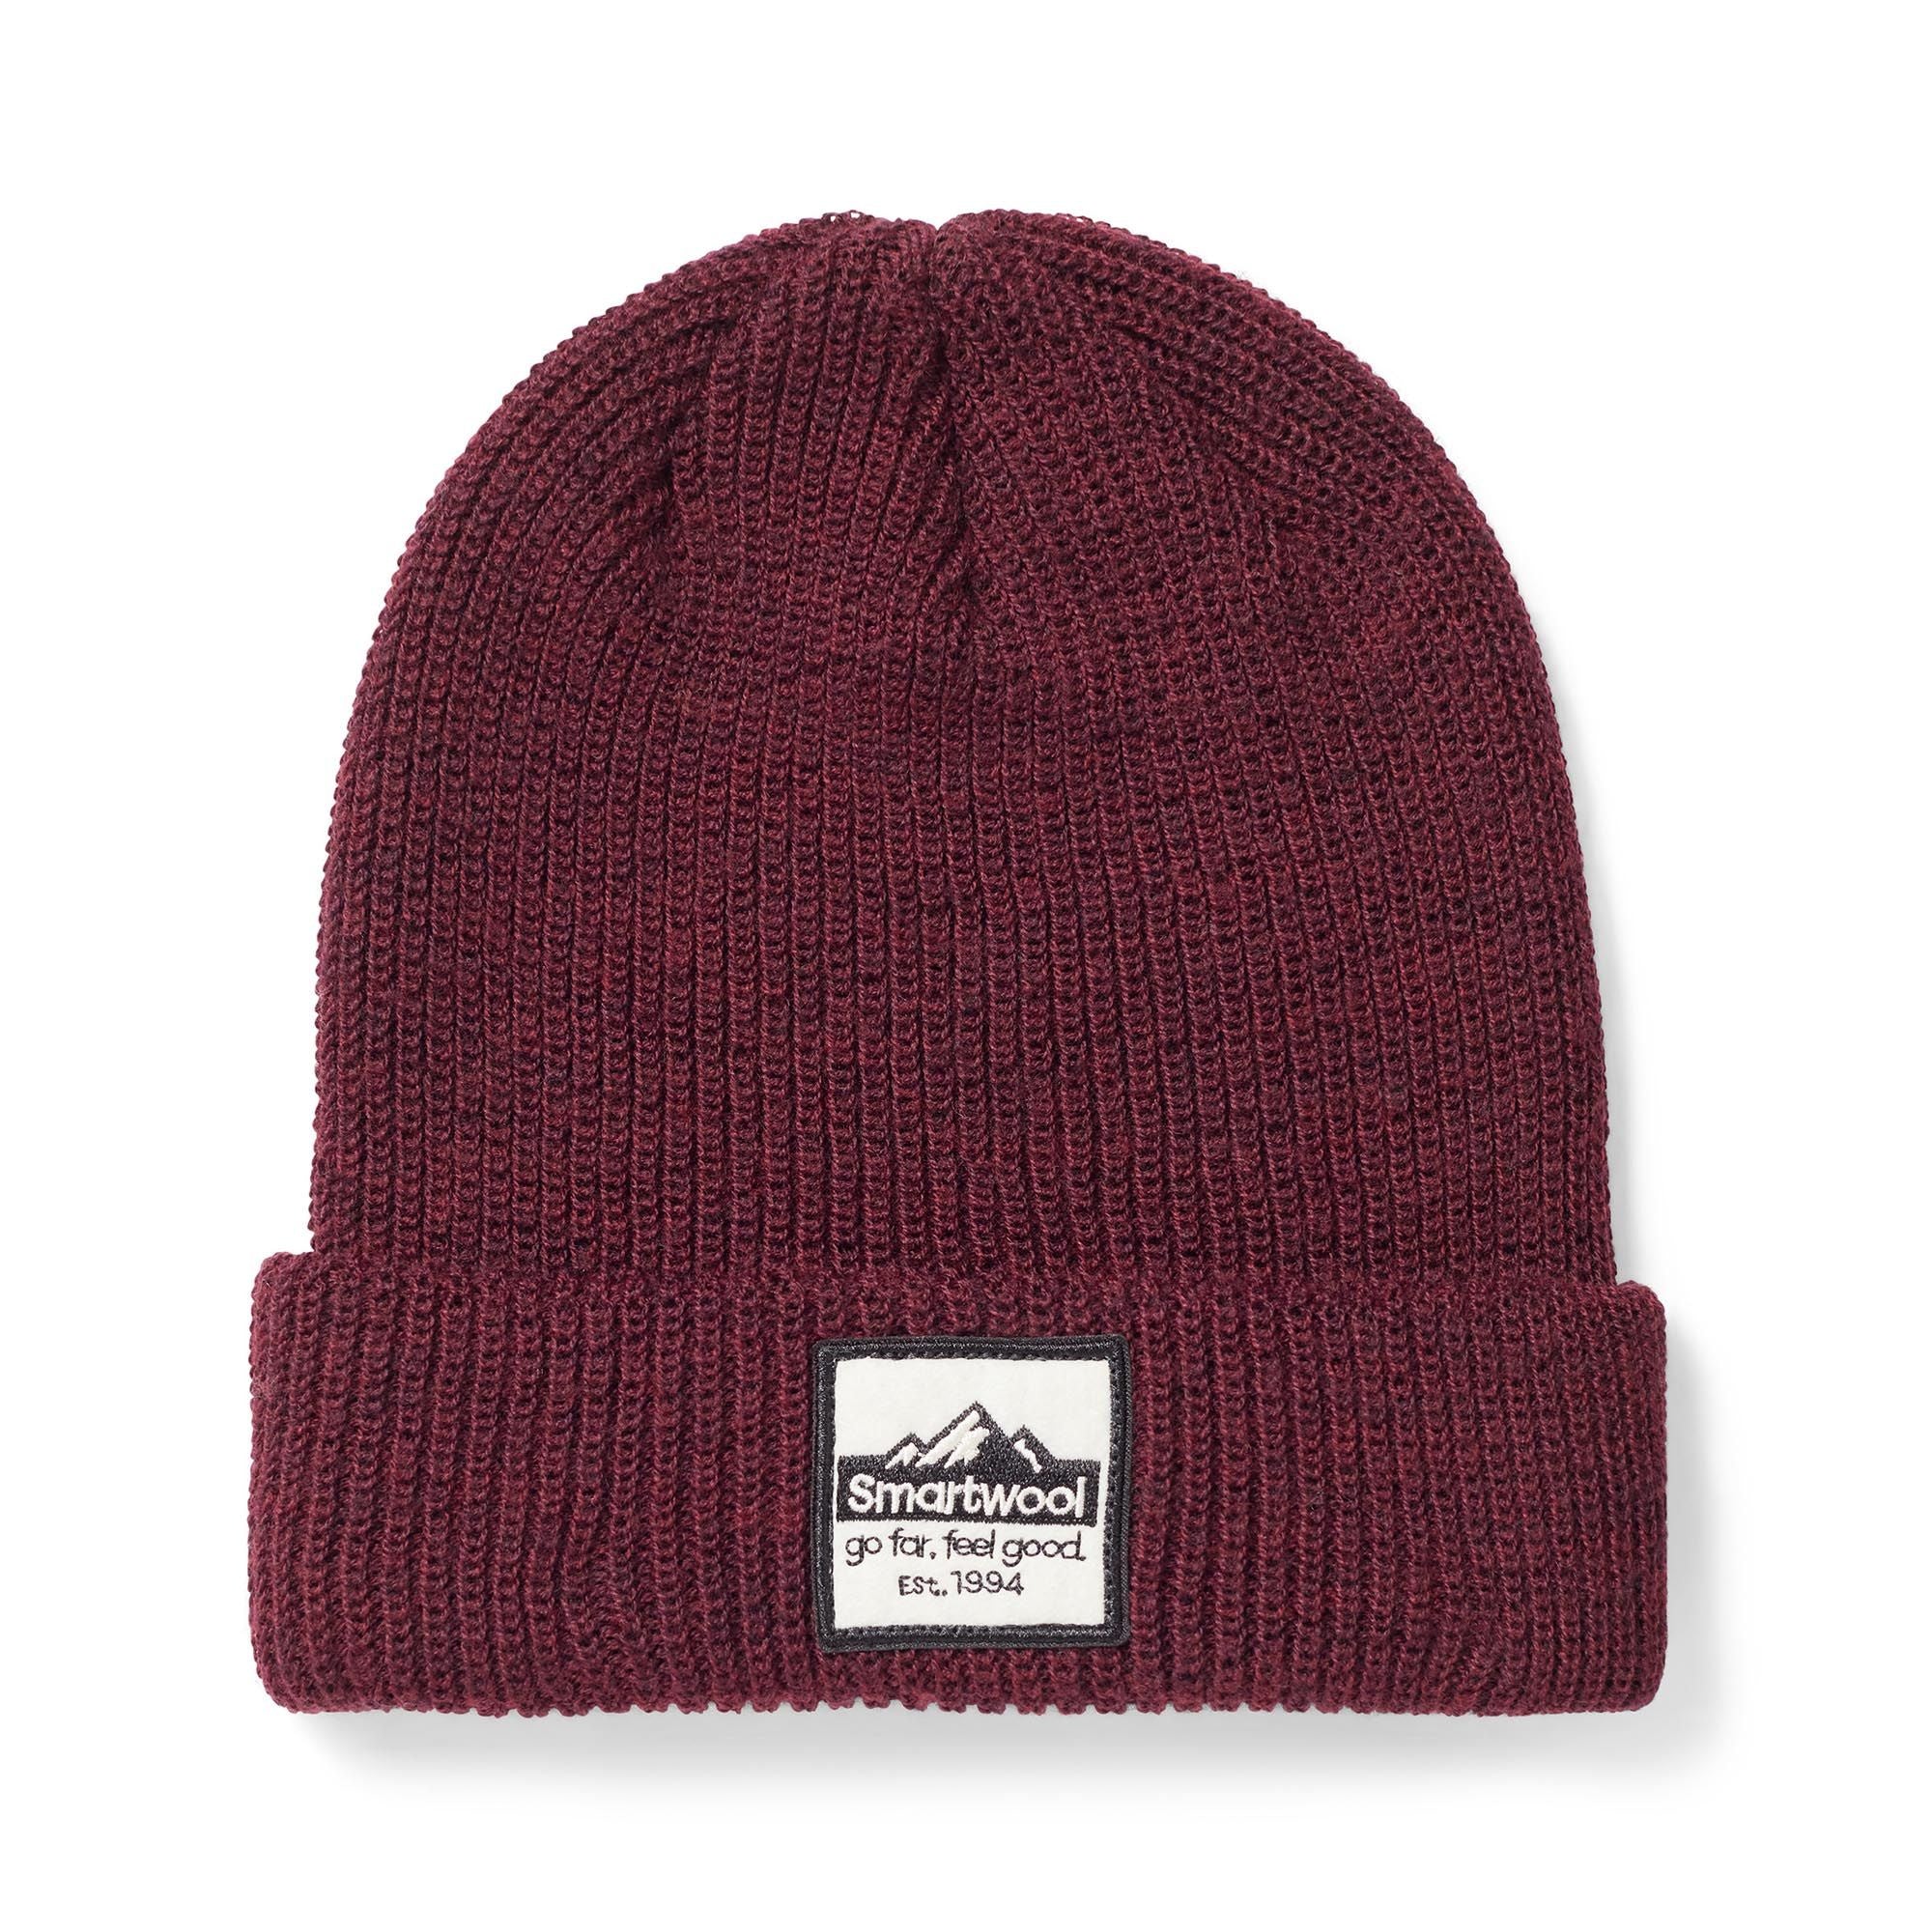 SMARTWOOL - PATCH BEANIE IN BLACK CHERRY HEATHER